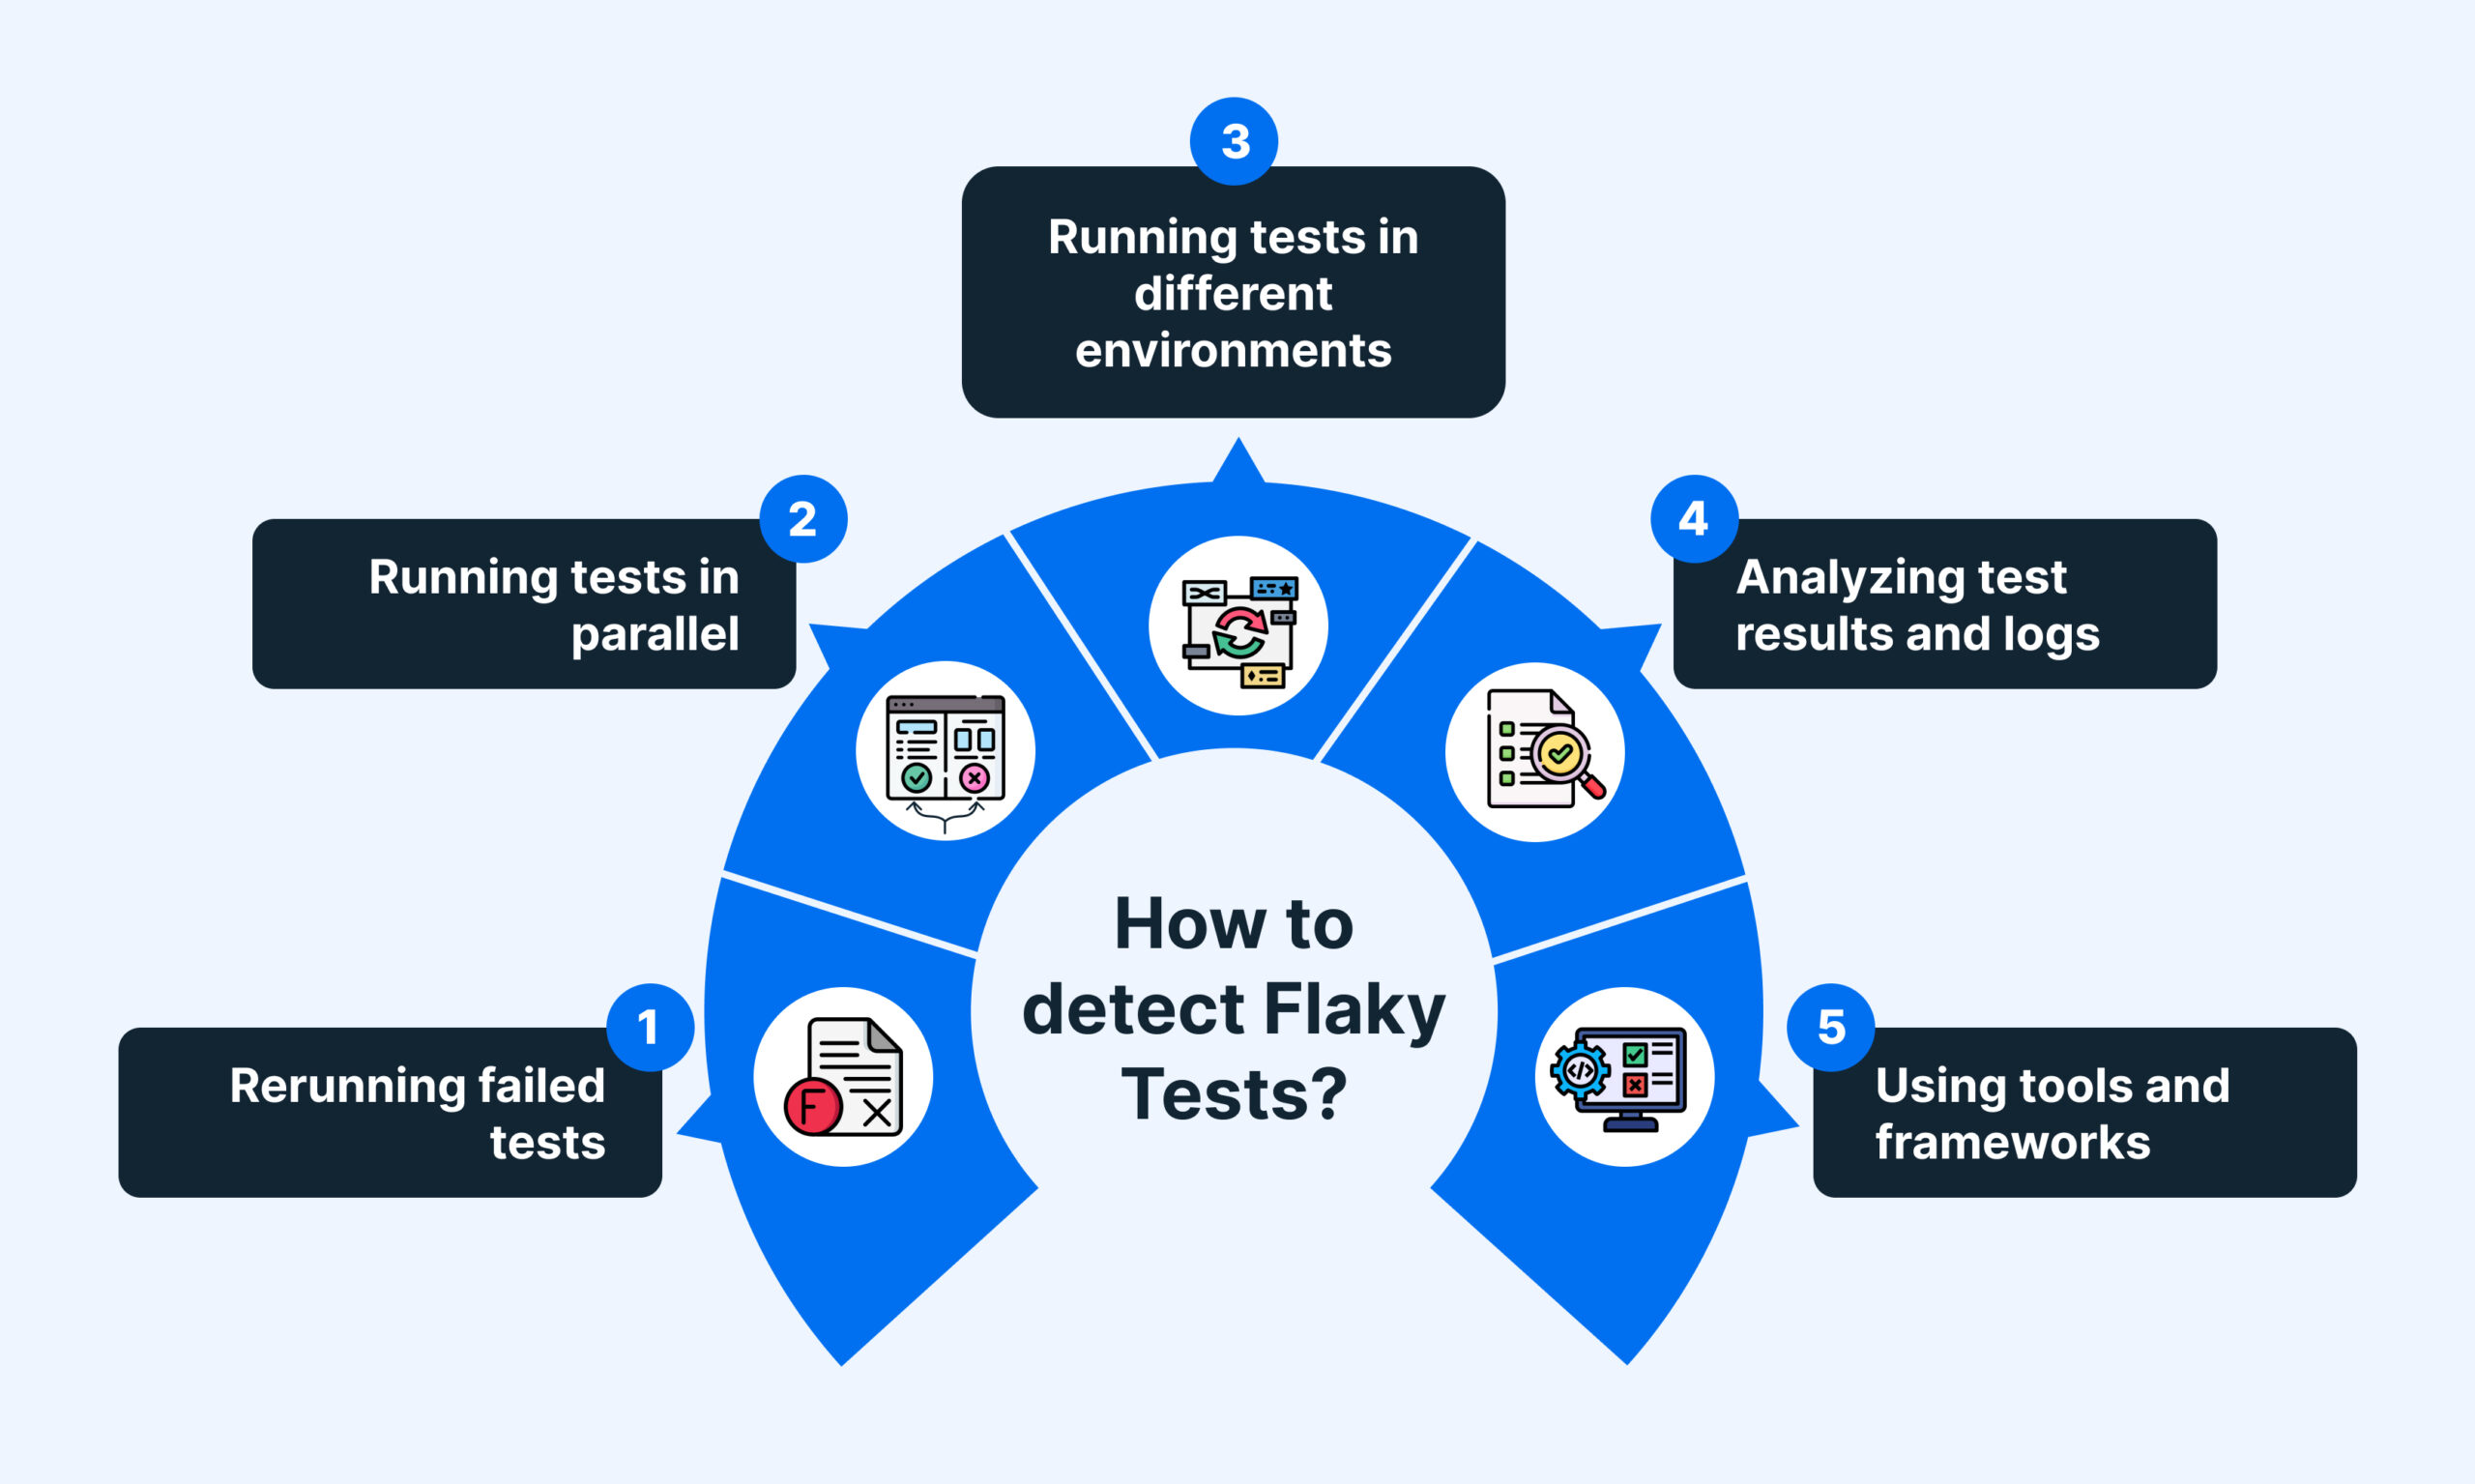 How to detect Flaky Tests